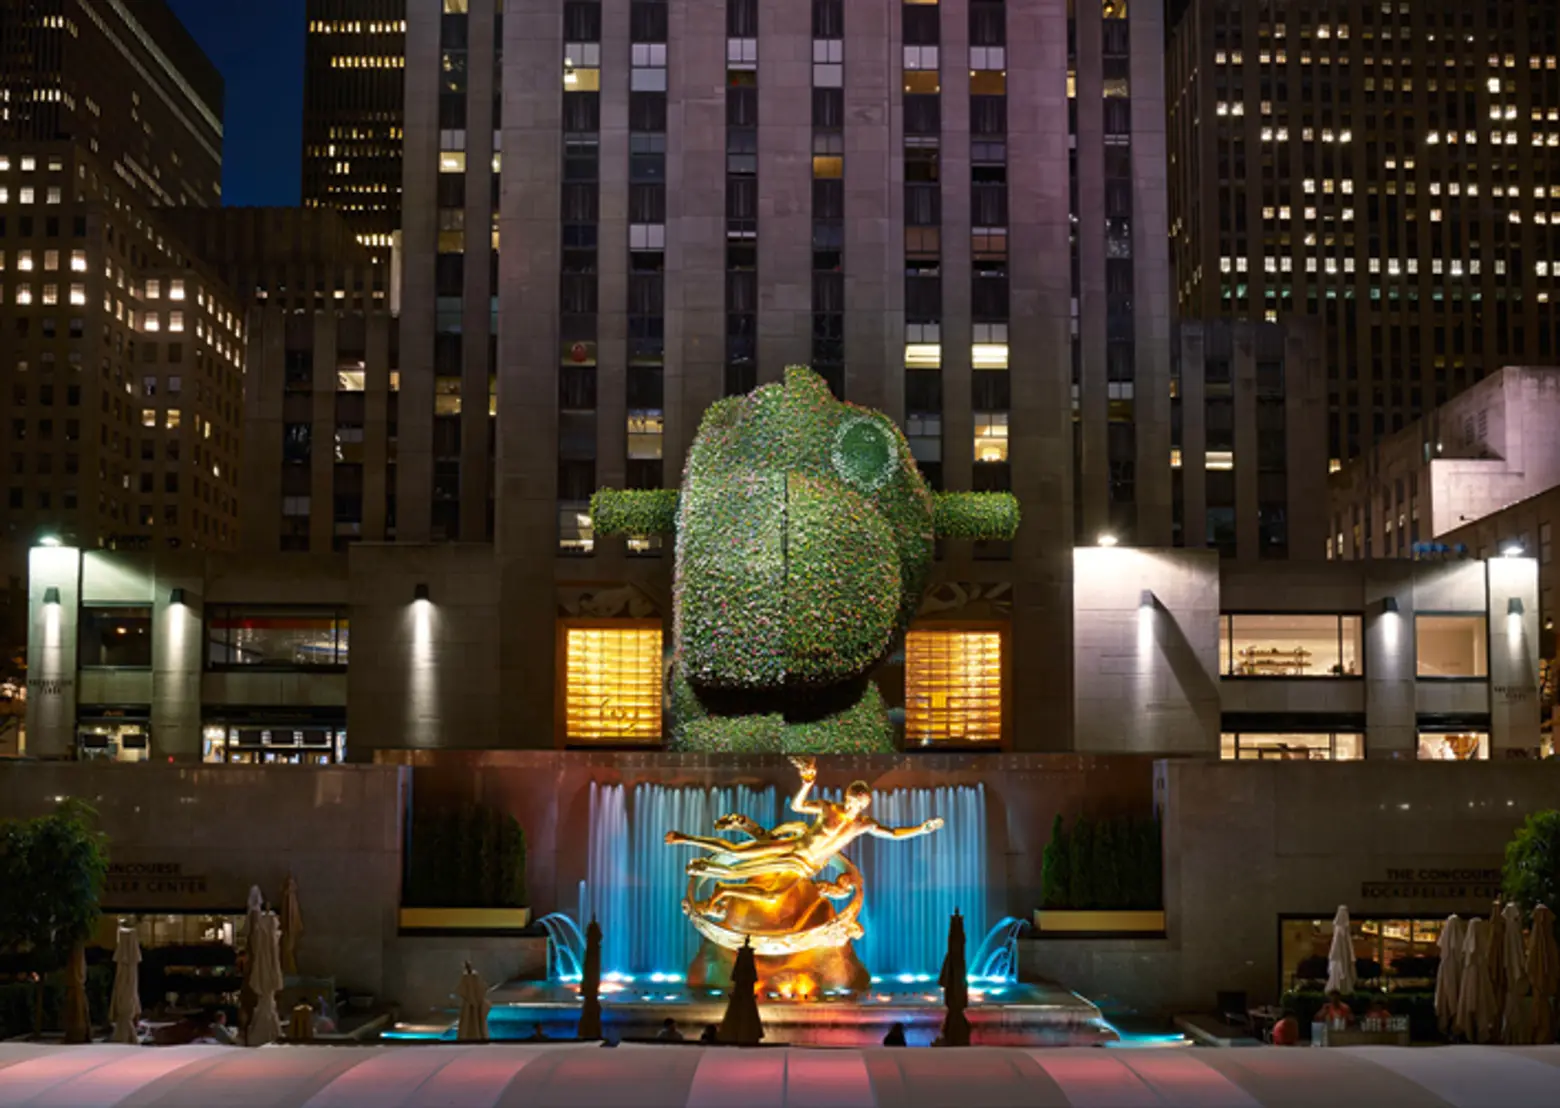 Giant Rocking Horse Head Sculpture by Jeff Koons Going Up at Rockefeller Center